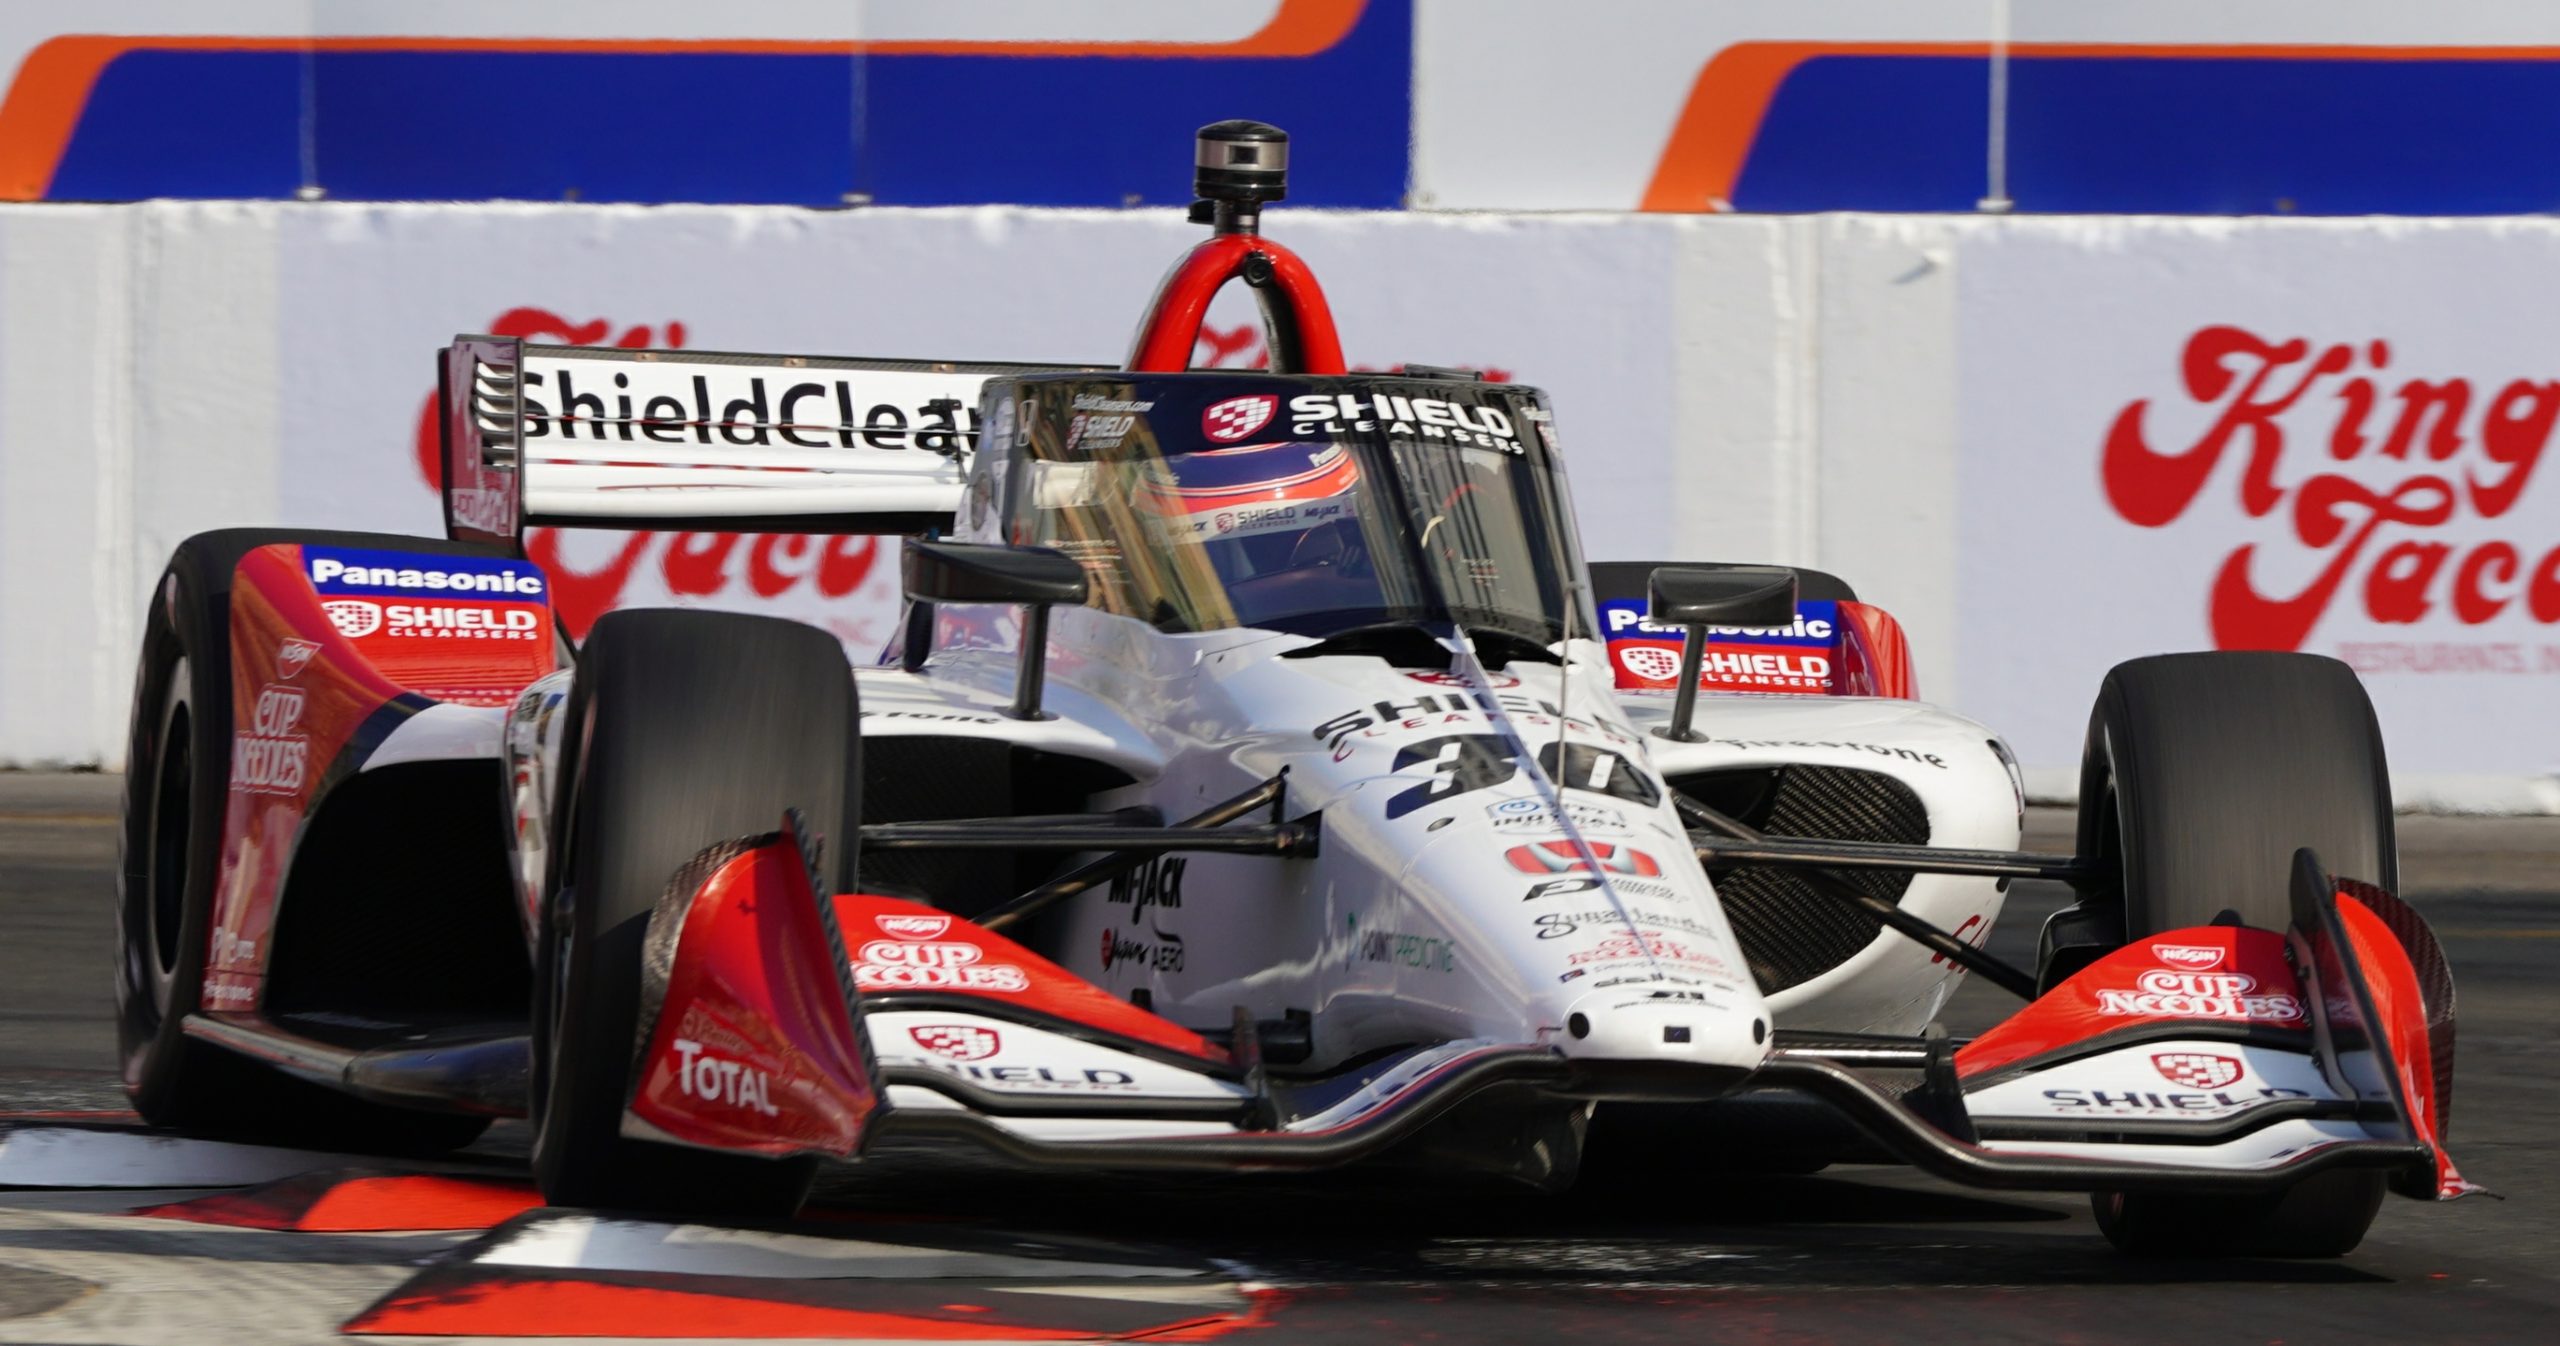 Takuma Sato hustled his RLL car through Turn 9 during qualifying but it was only good enough for the 16th starting position.